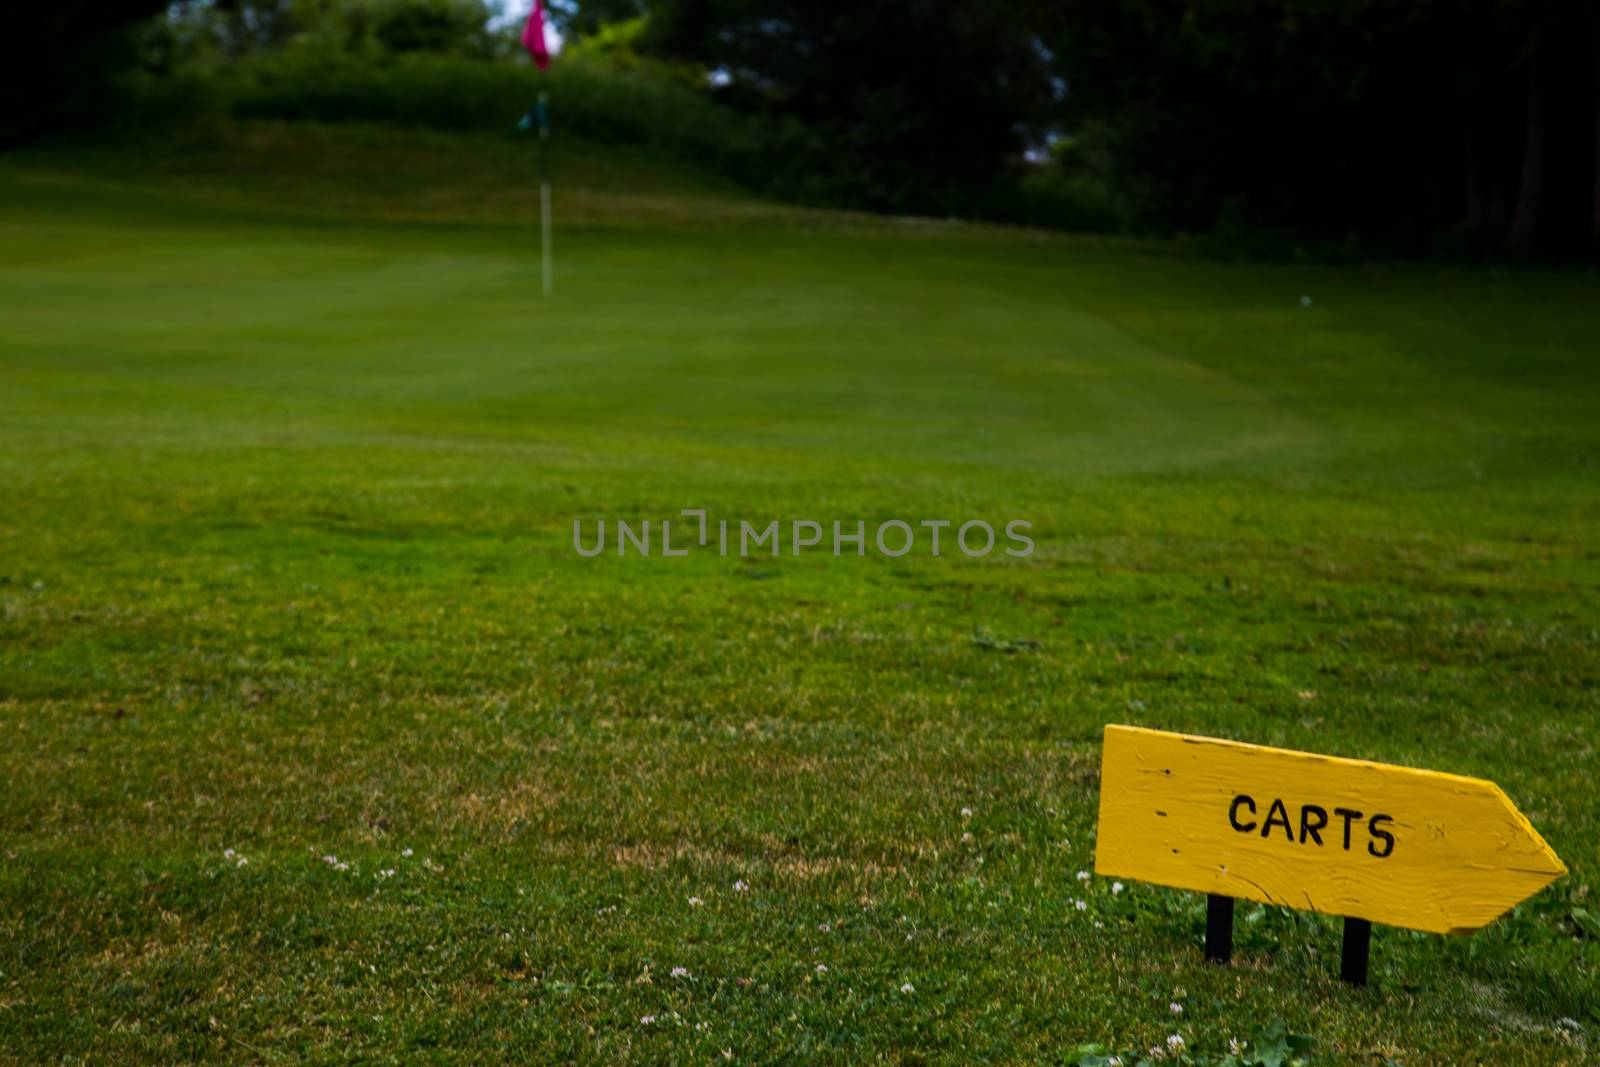 Golf Course Sign Directs Carts This Way by colintemple